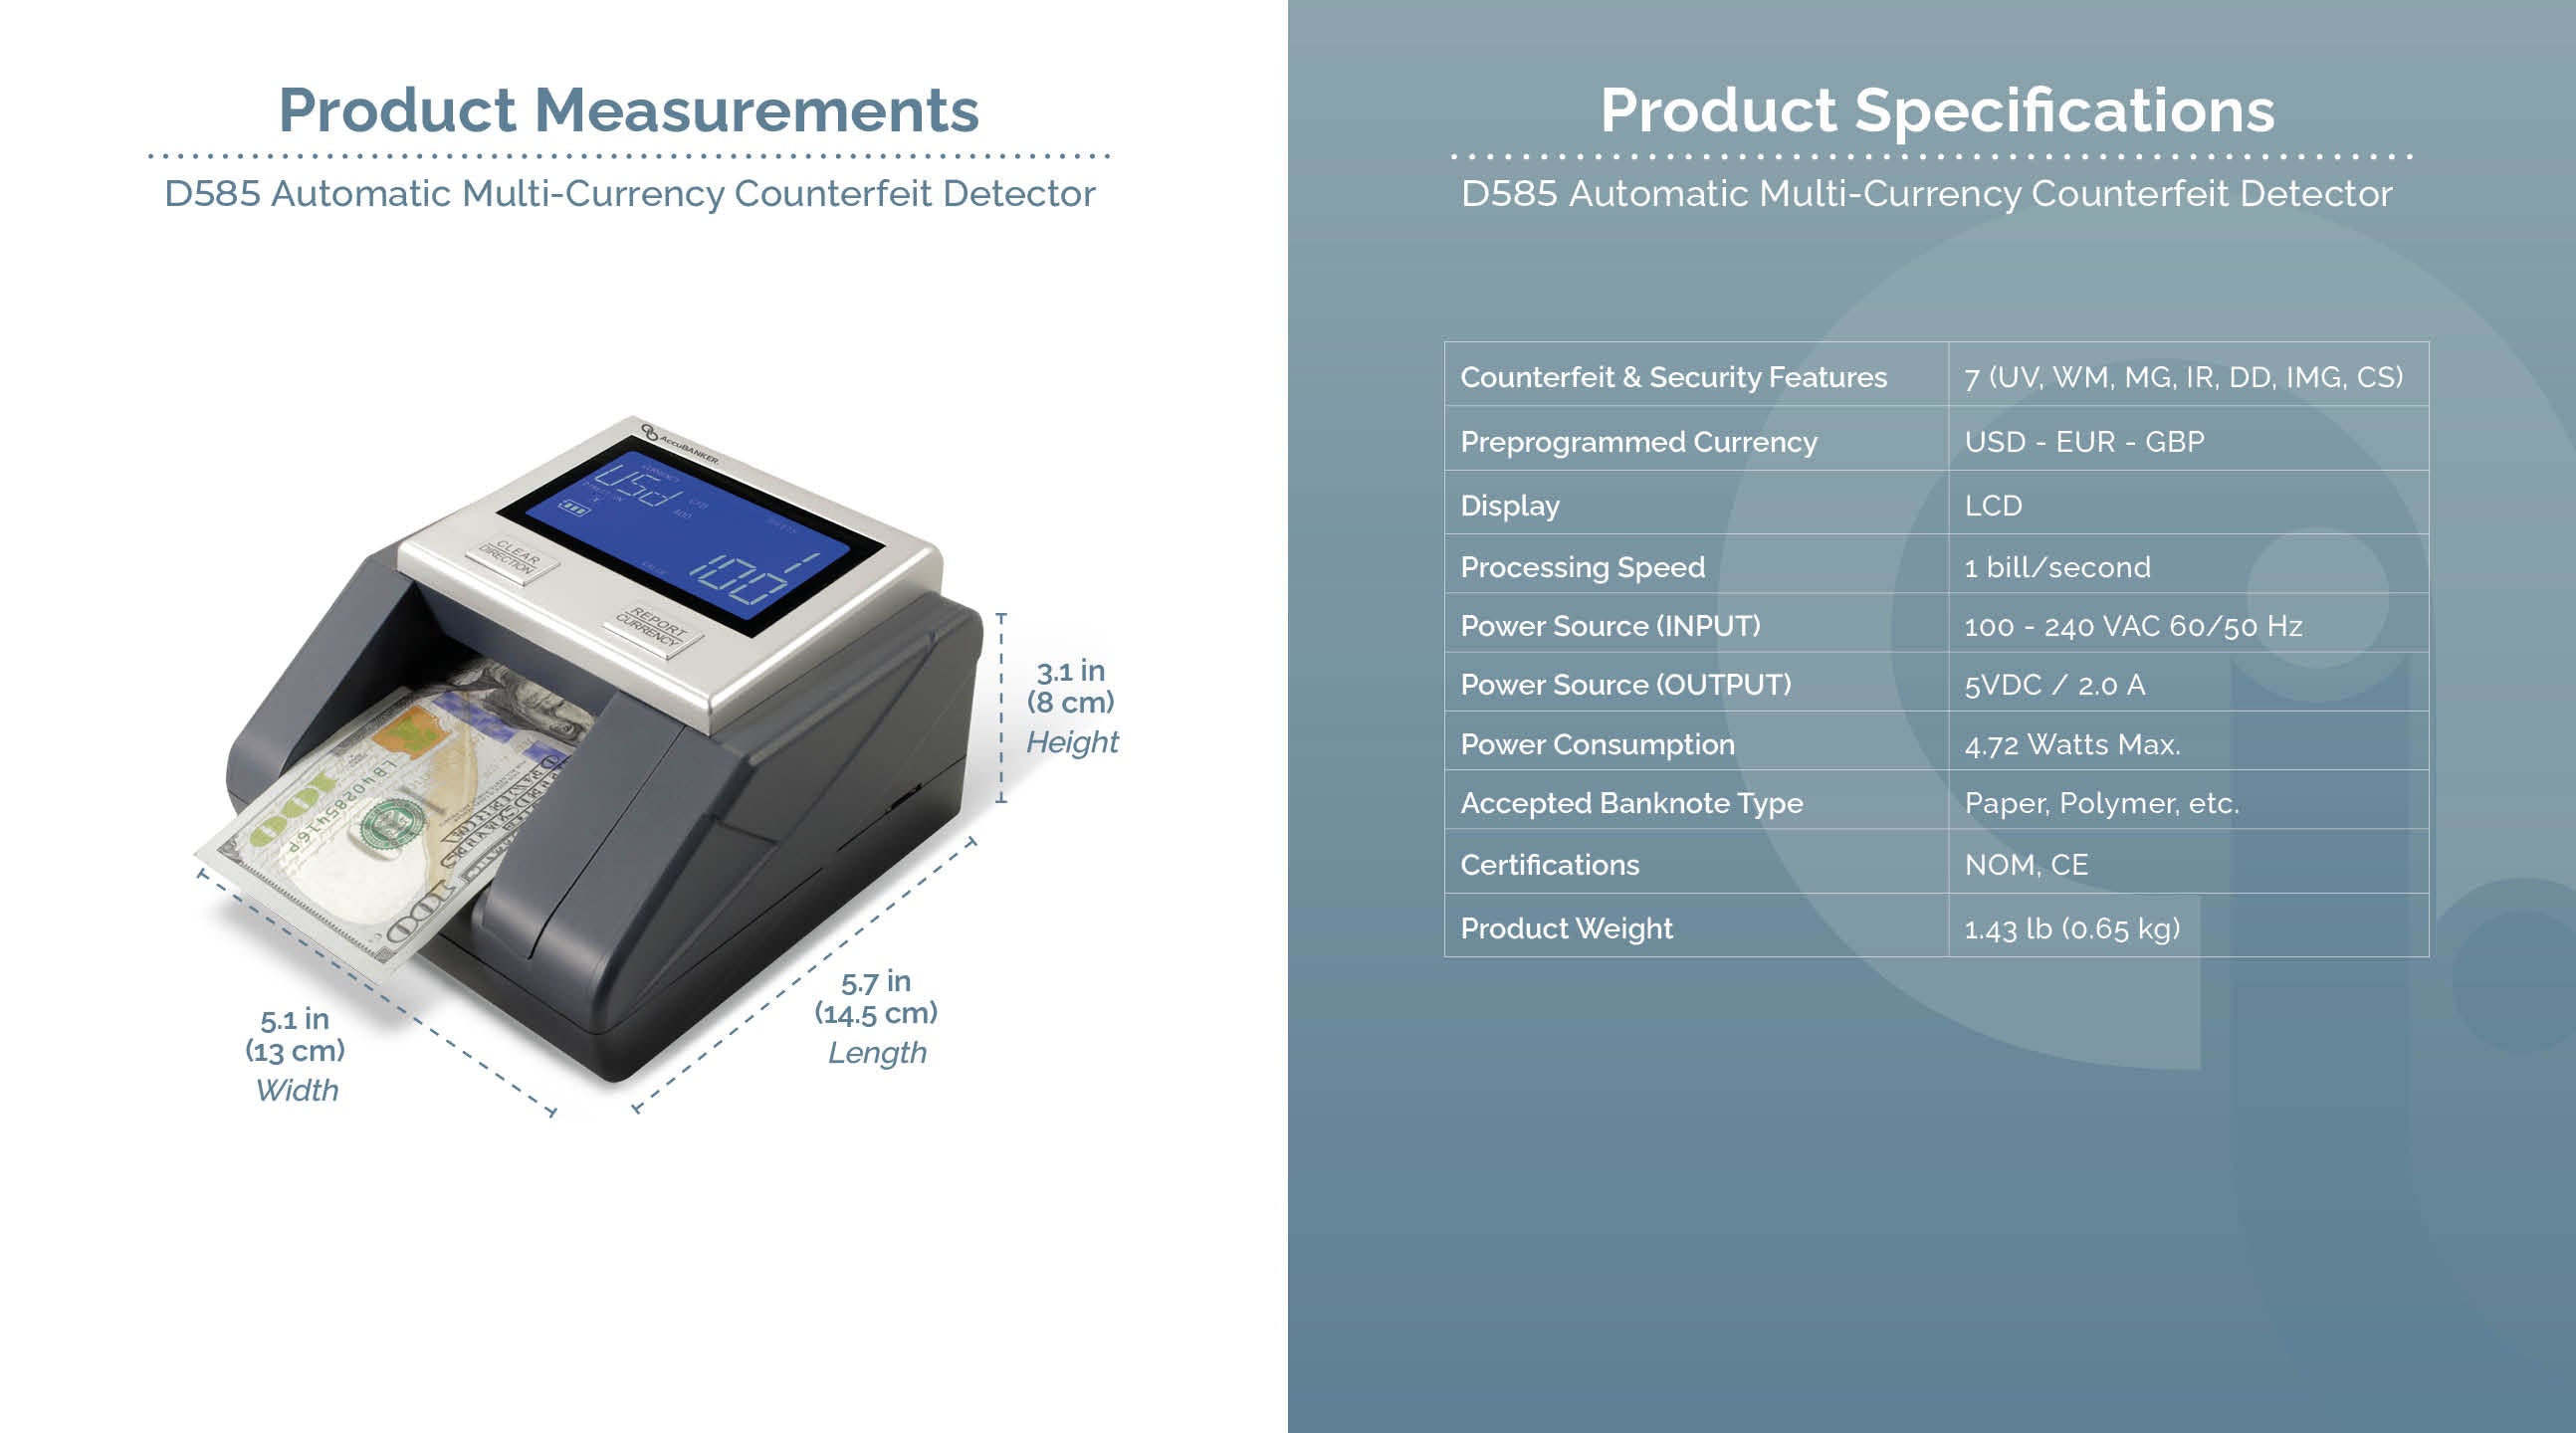 D585 Automatic Multi-Currency Counterfeit Detector Features & Specifications